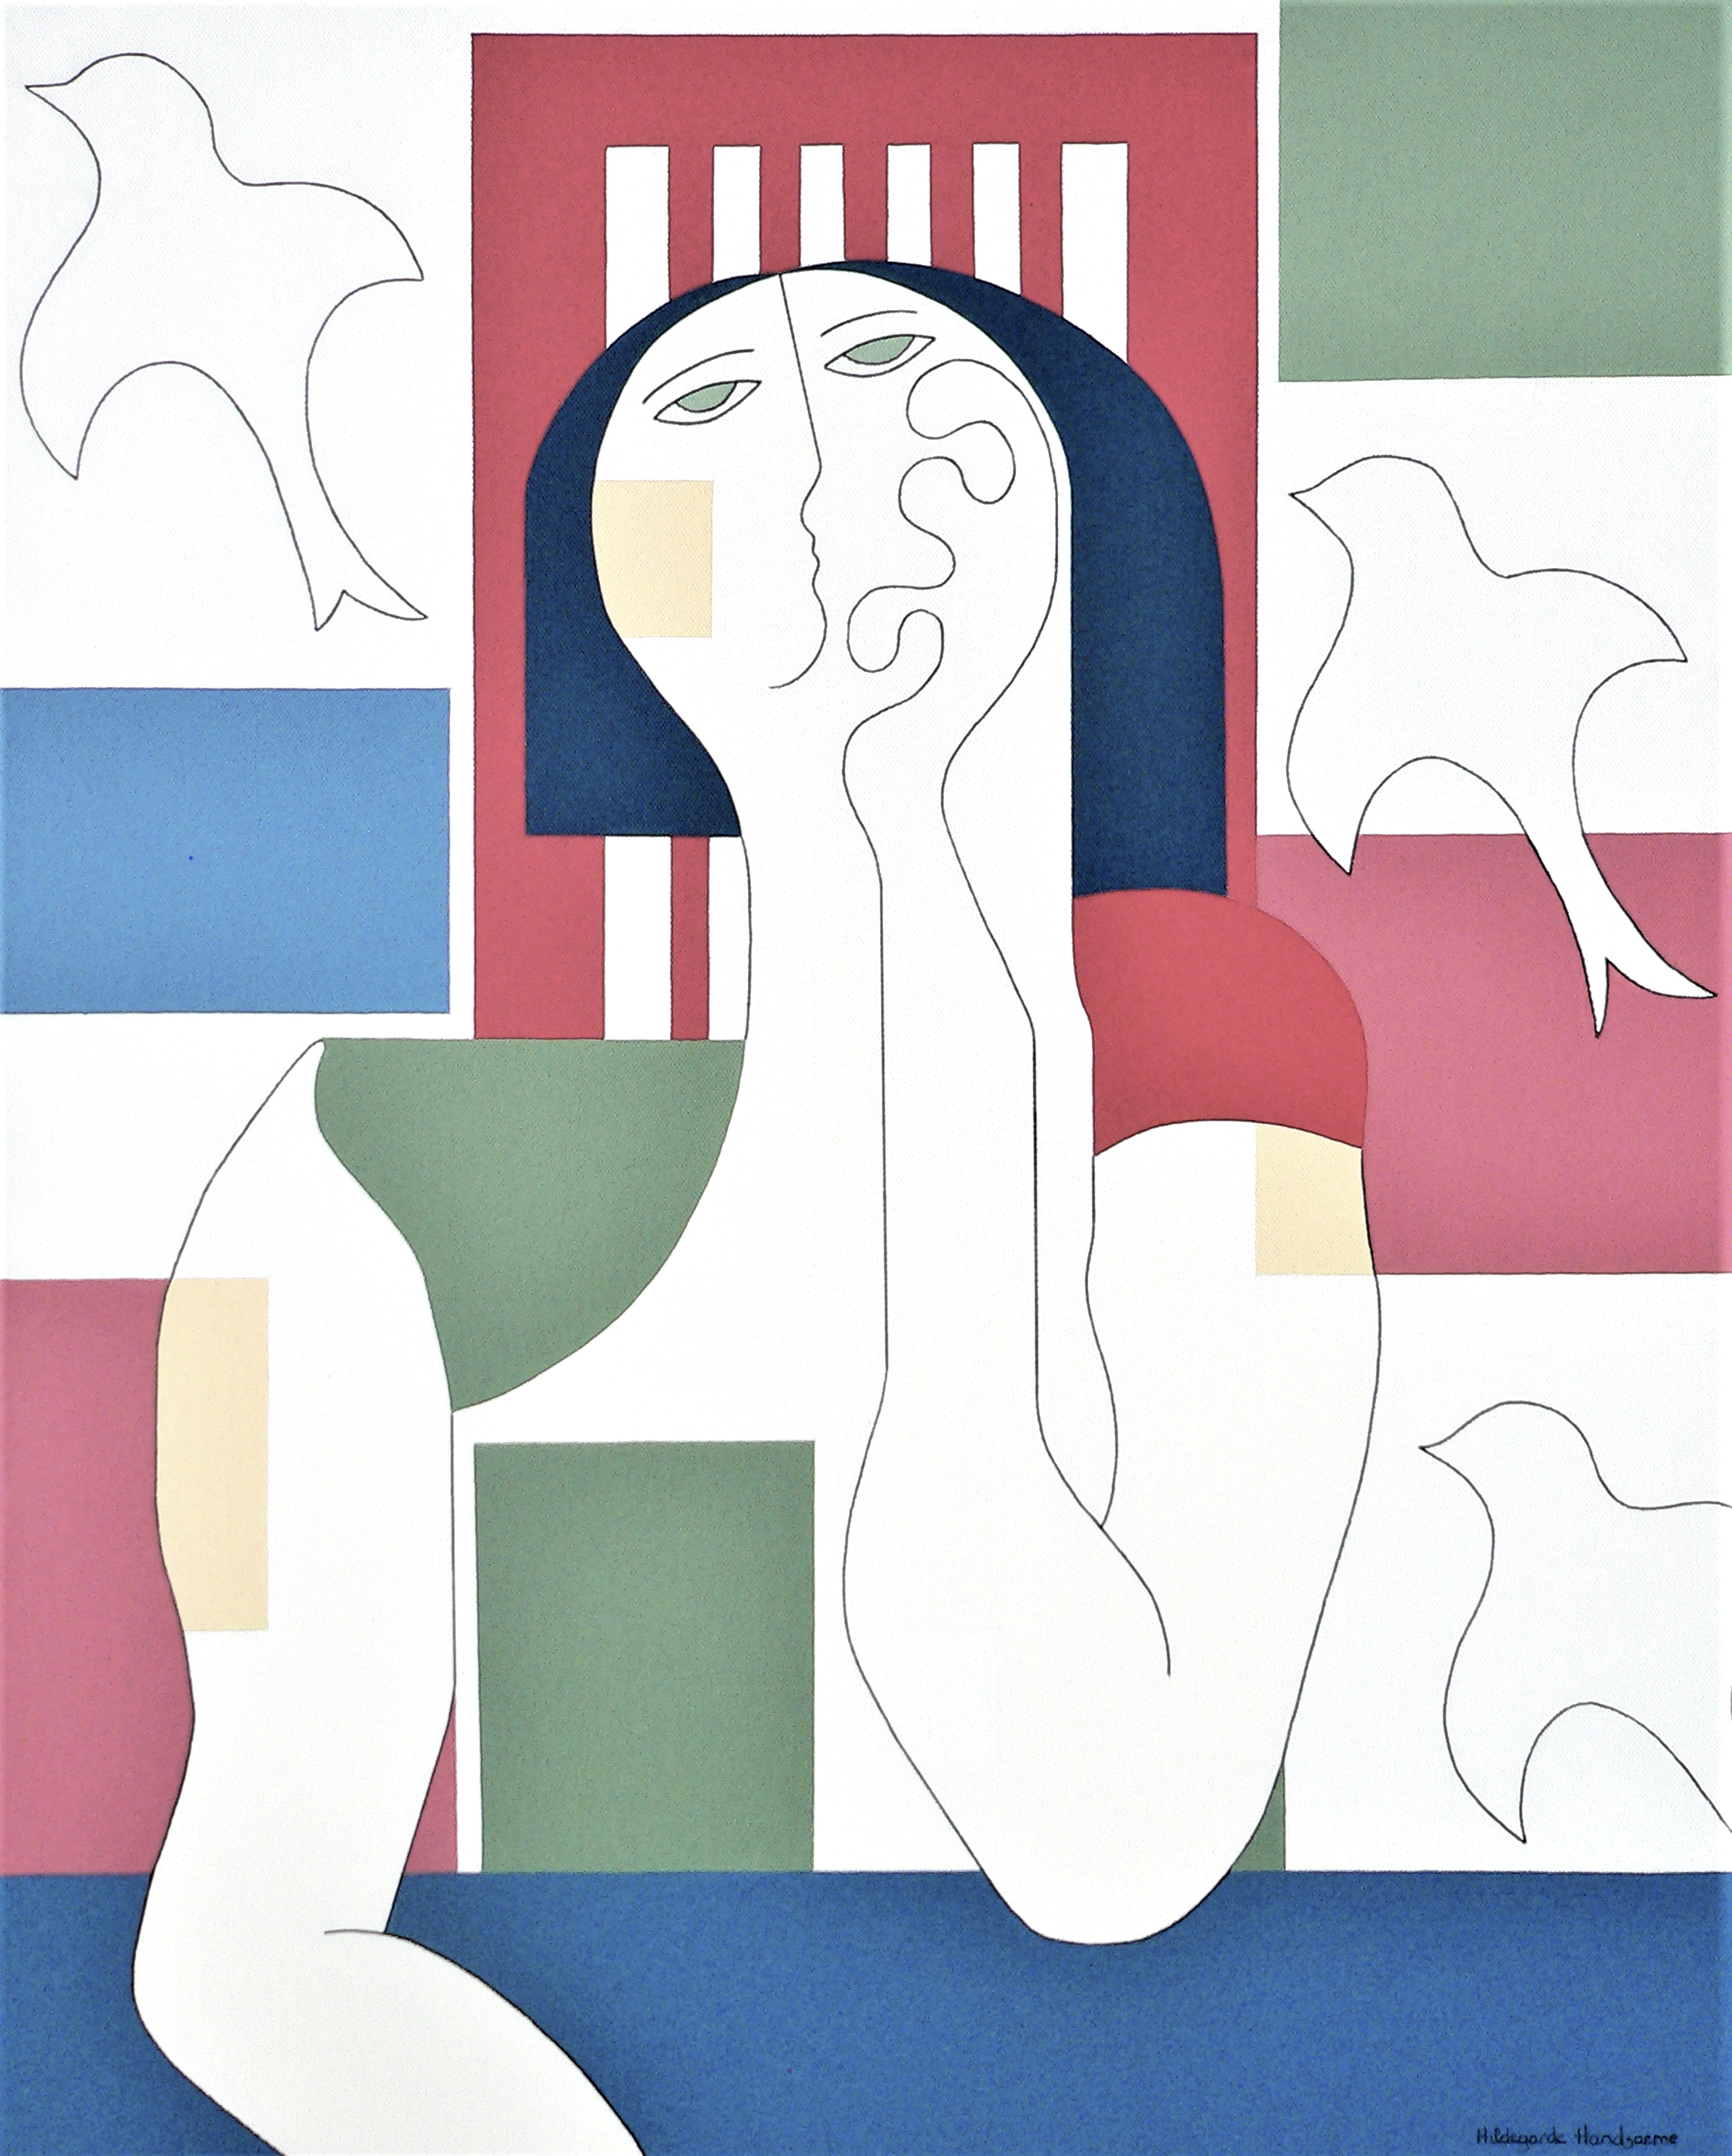 Hildegarde Handsaeme Abstract Painting - Escape in Dreams, Modern Abstract Geometric Art Portrait Canvas Red Blue Green